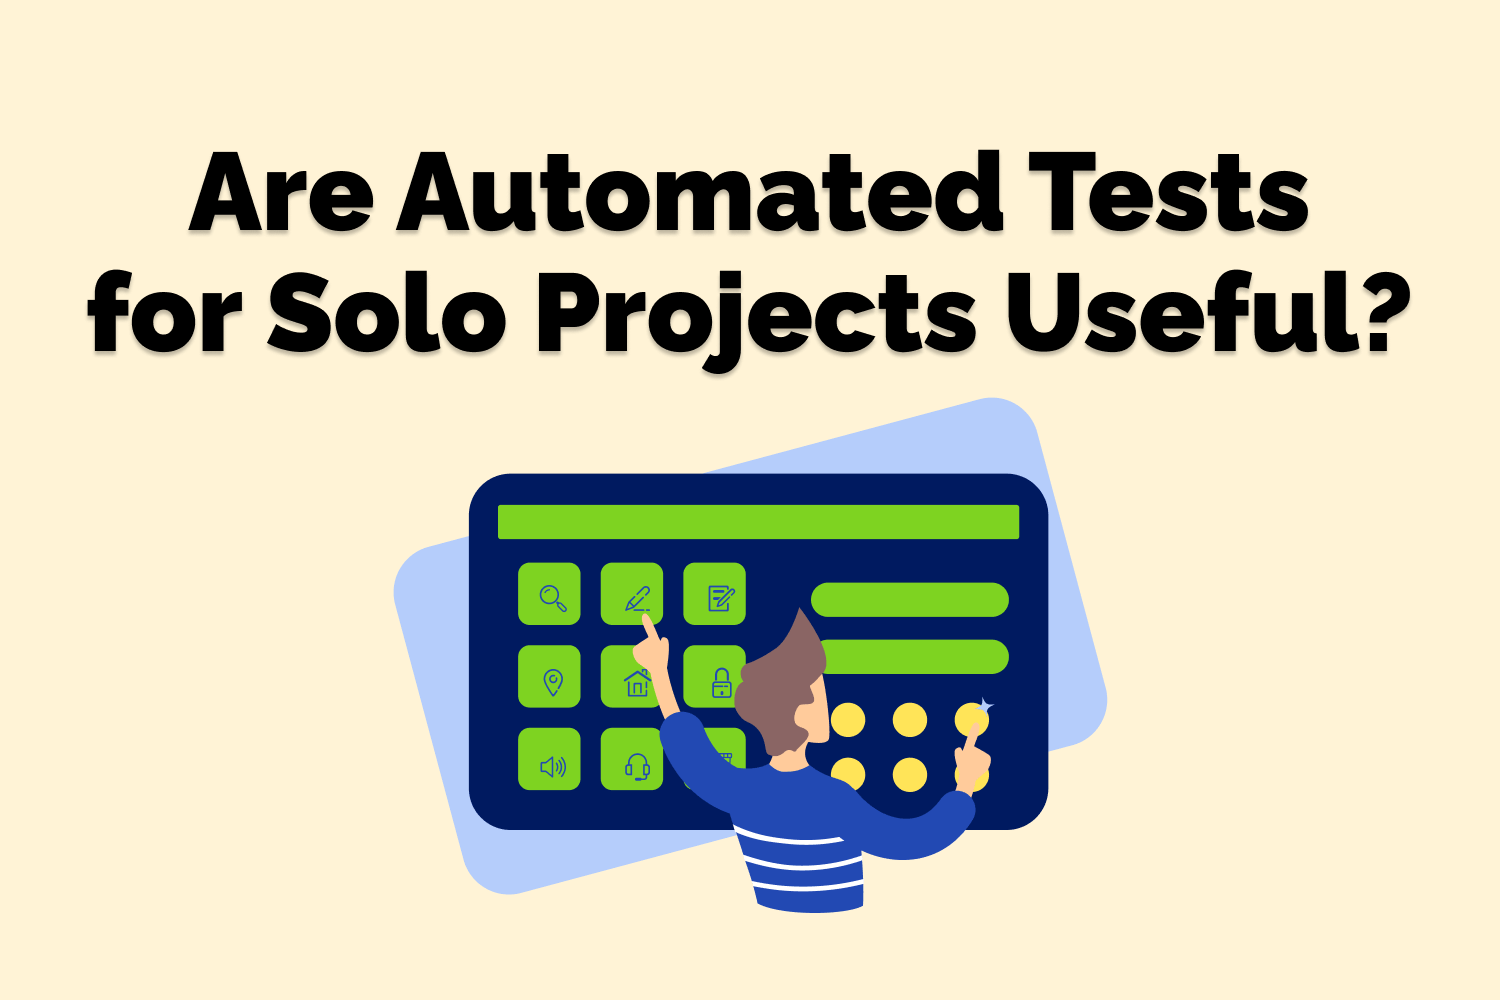 Are Automated Tests for Solo Projects Useful?